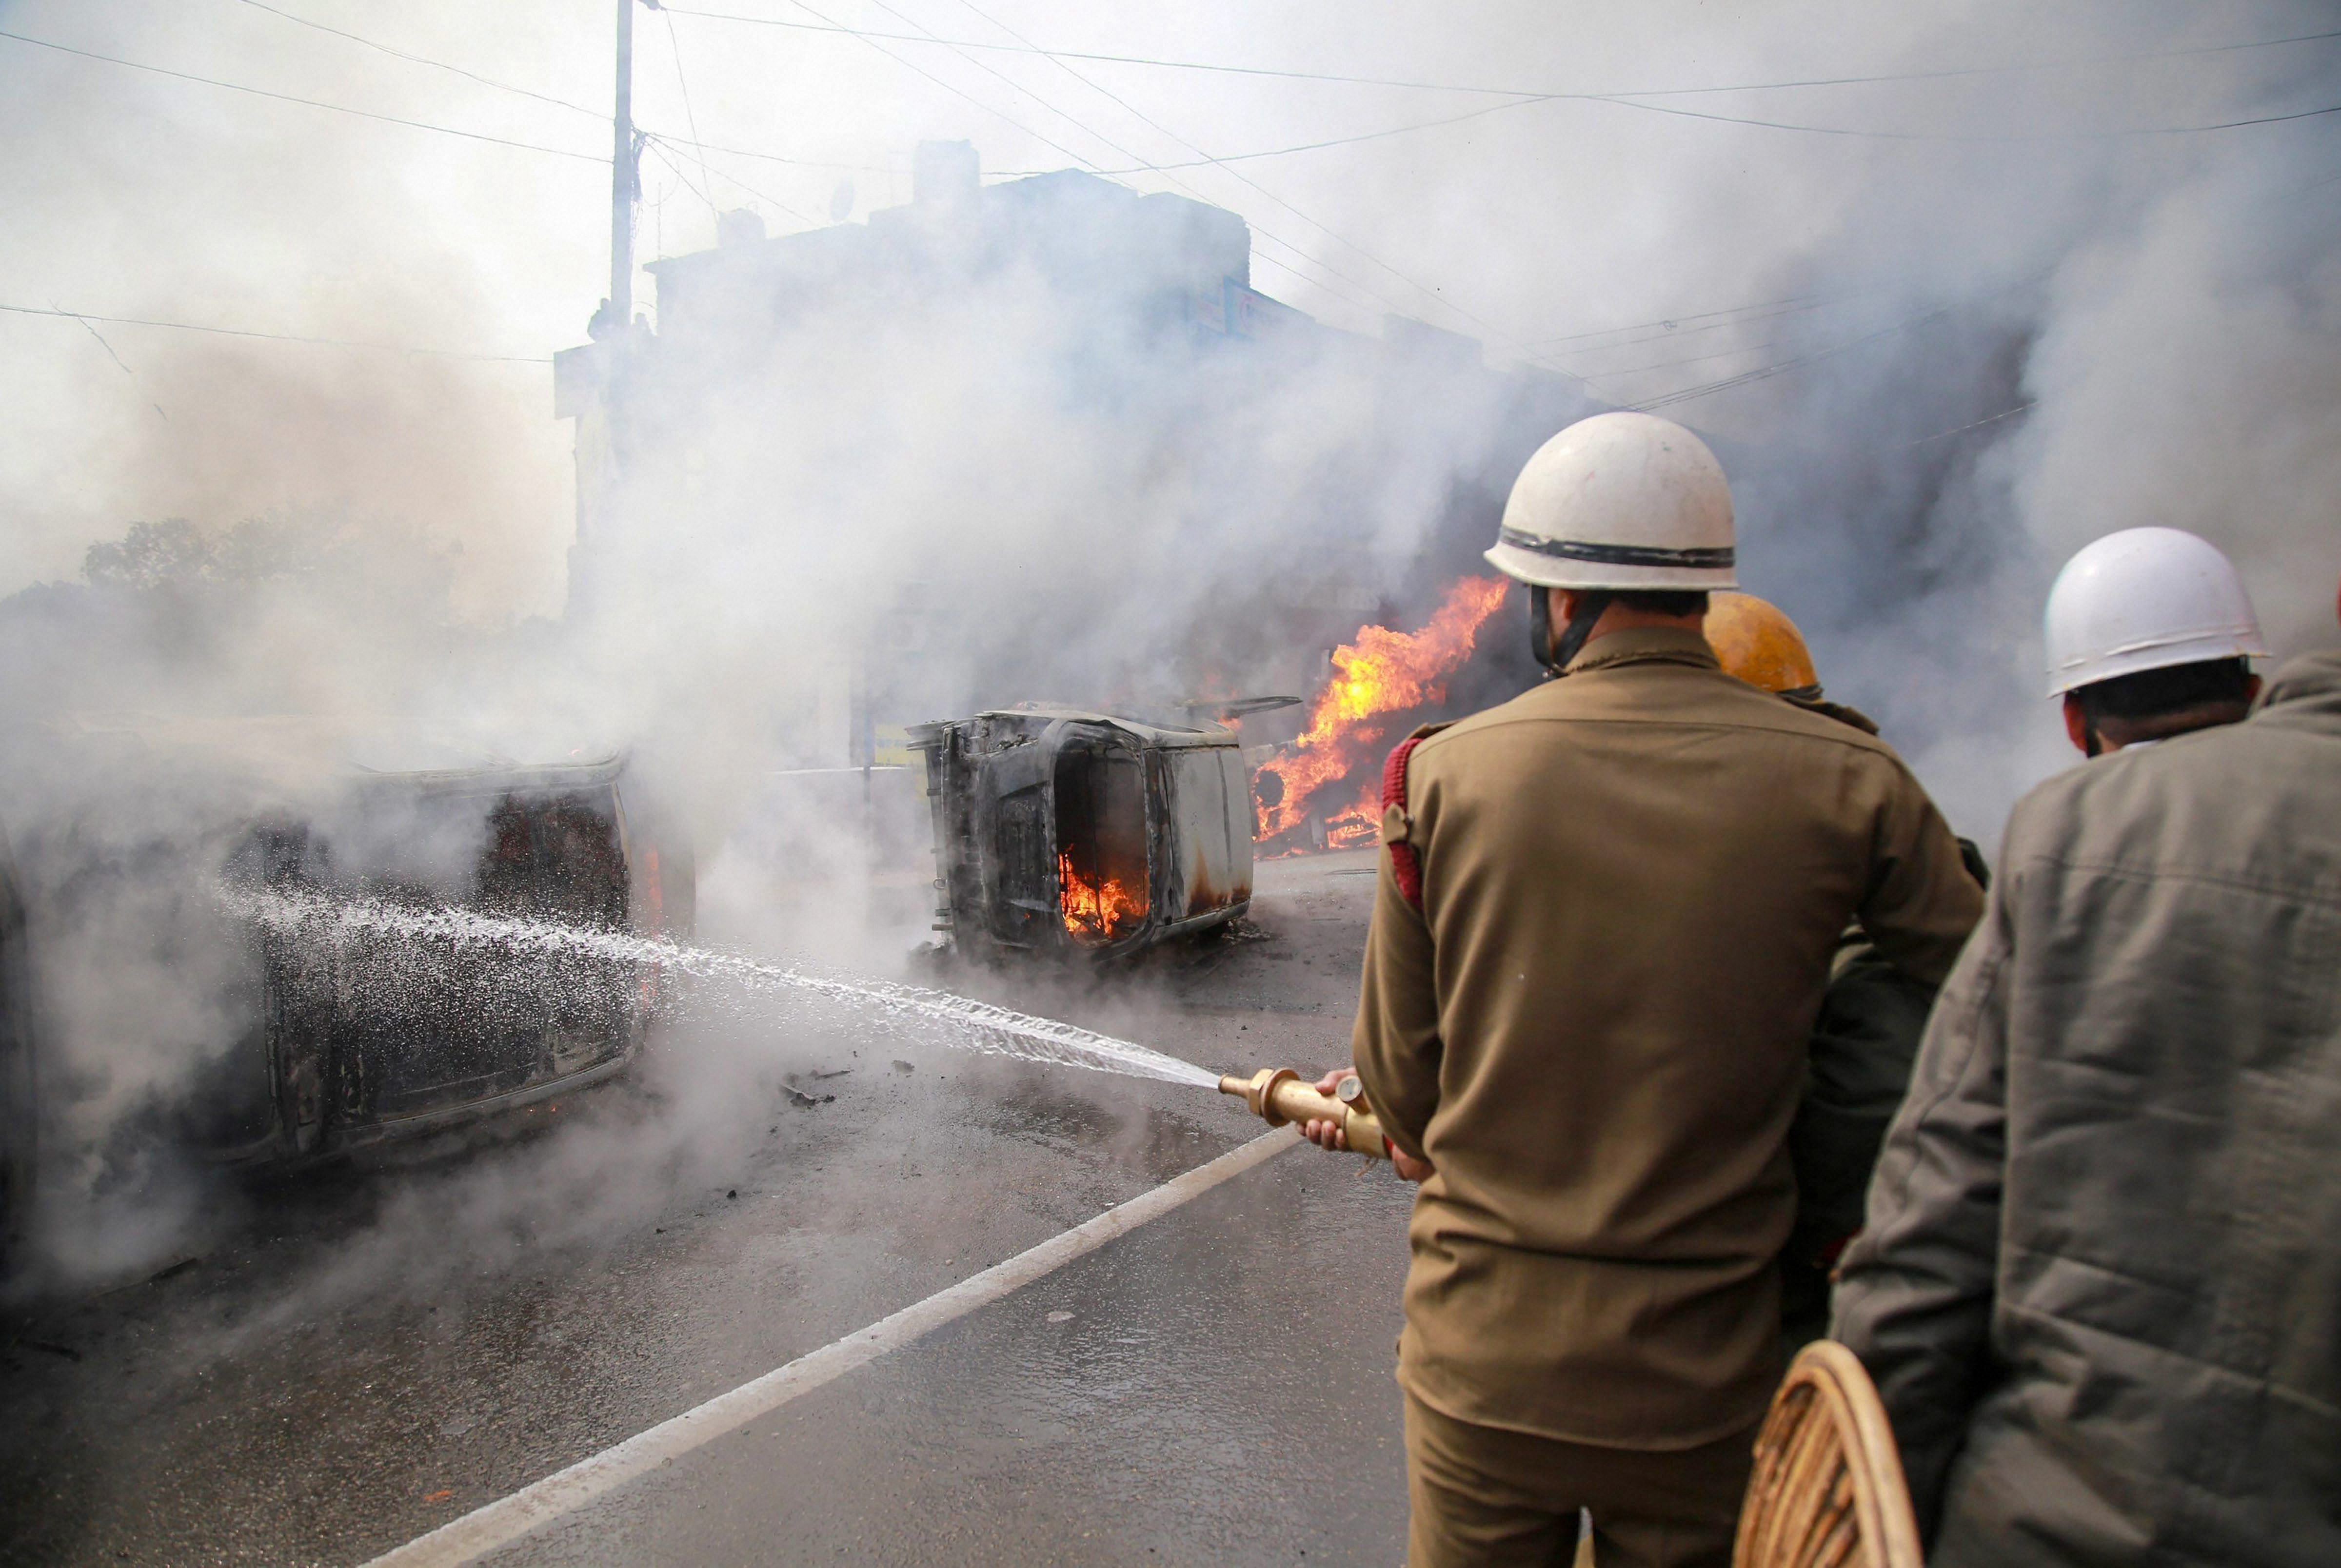 Jammu: Firemen spray water to douse the flames on the vehicles which were set ablaze during a protest against Thursday's Pulwama terror attack, in Jammu, Friday, Feb. 15, 2019. (PTI Photo)